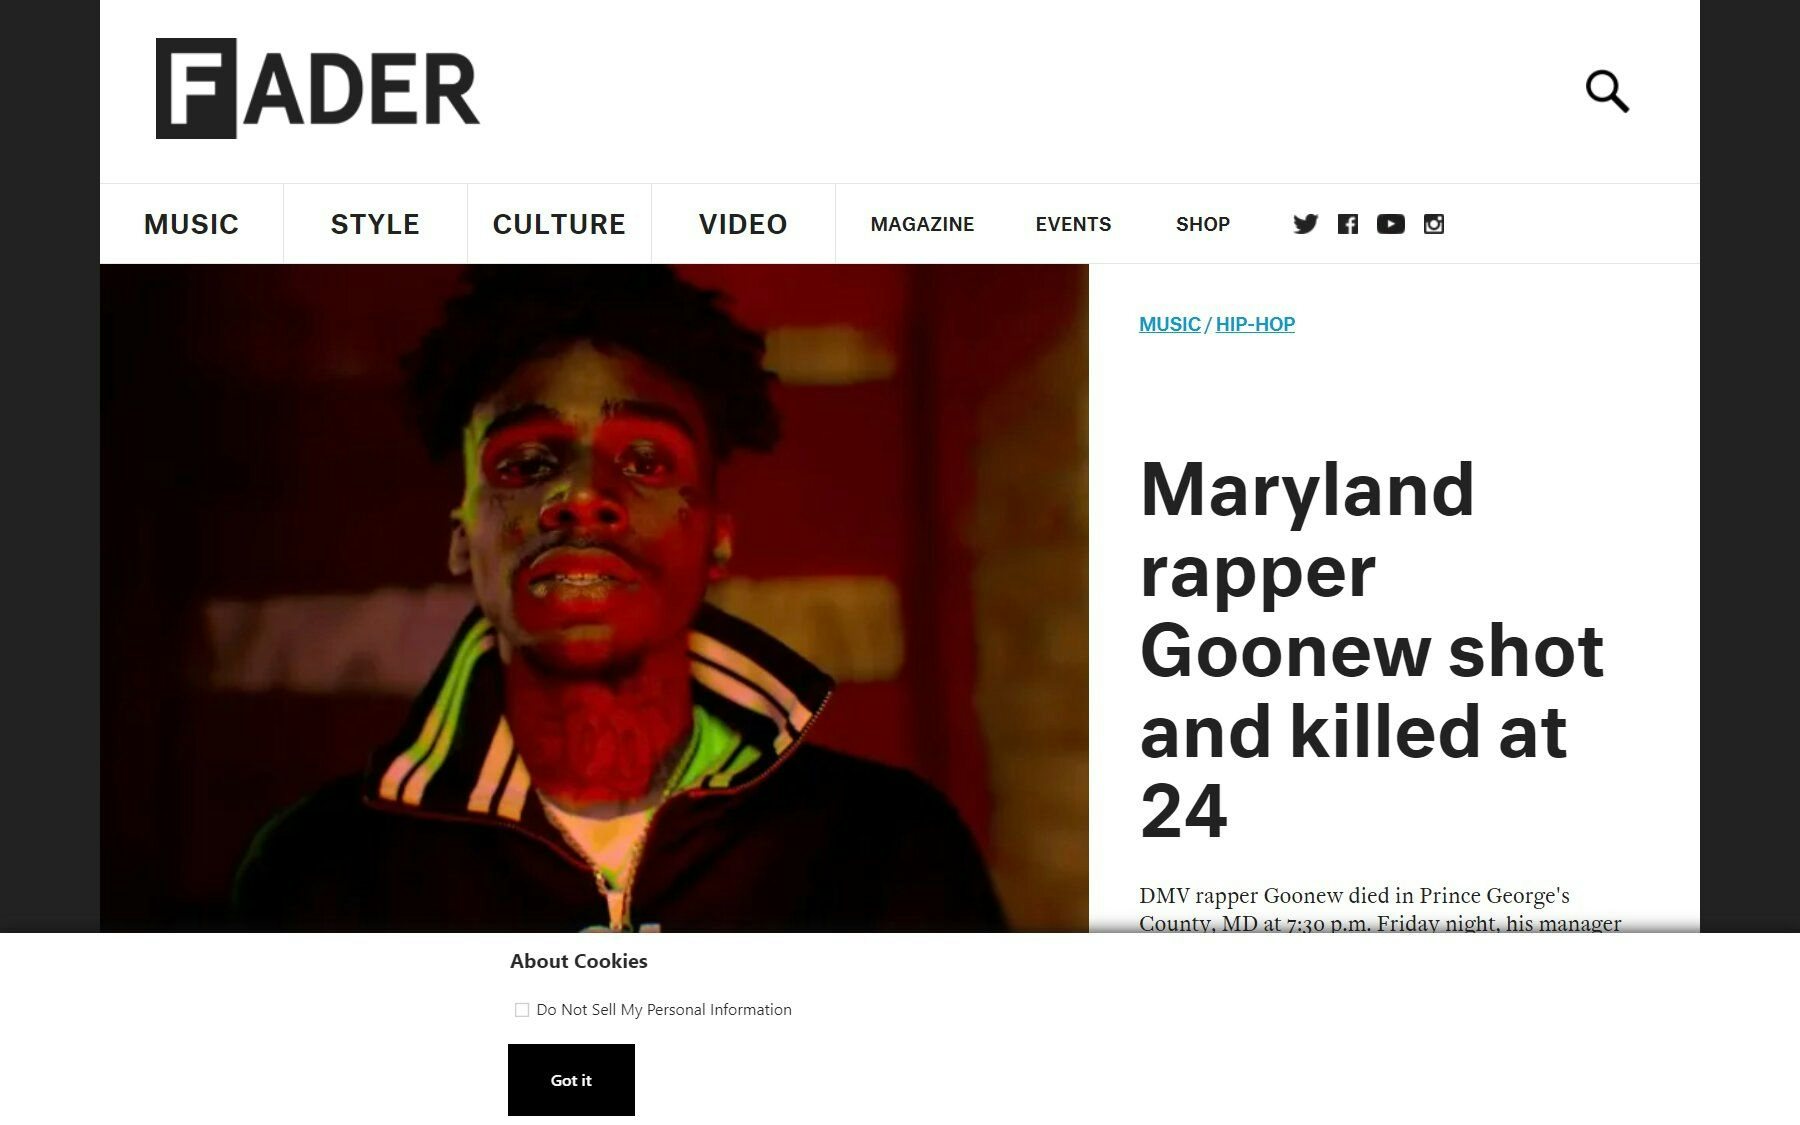 The Fader music blog